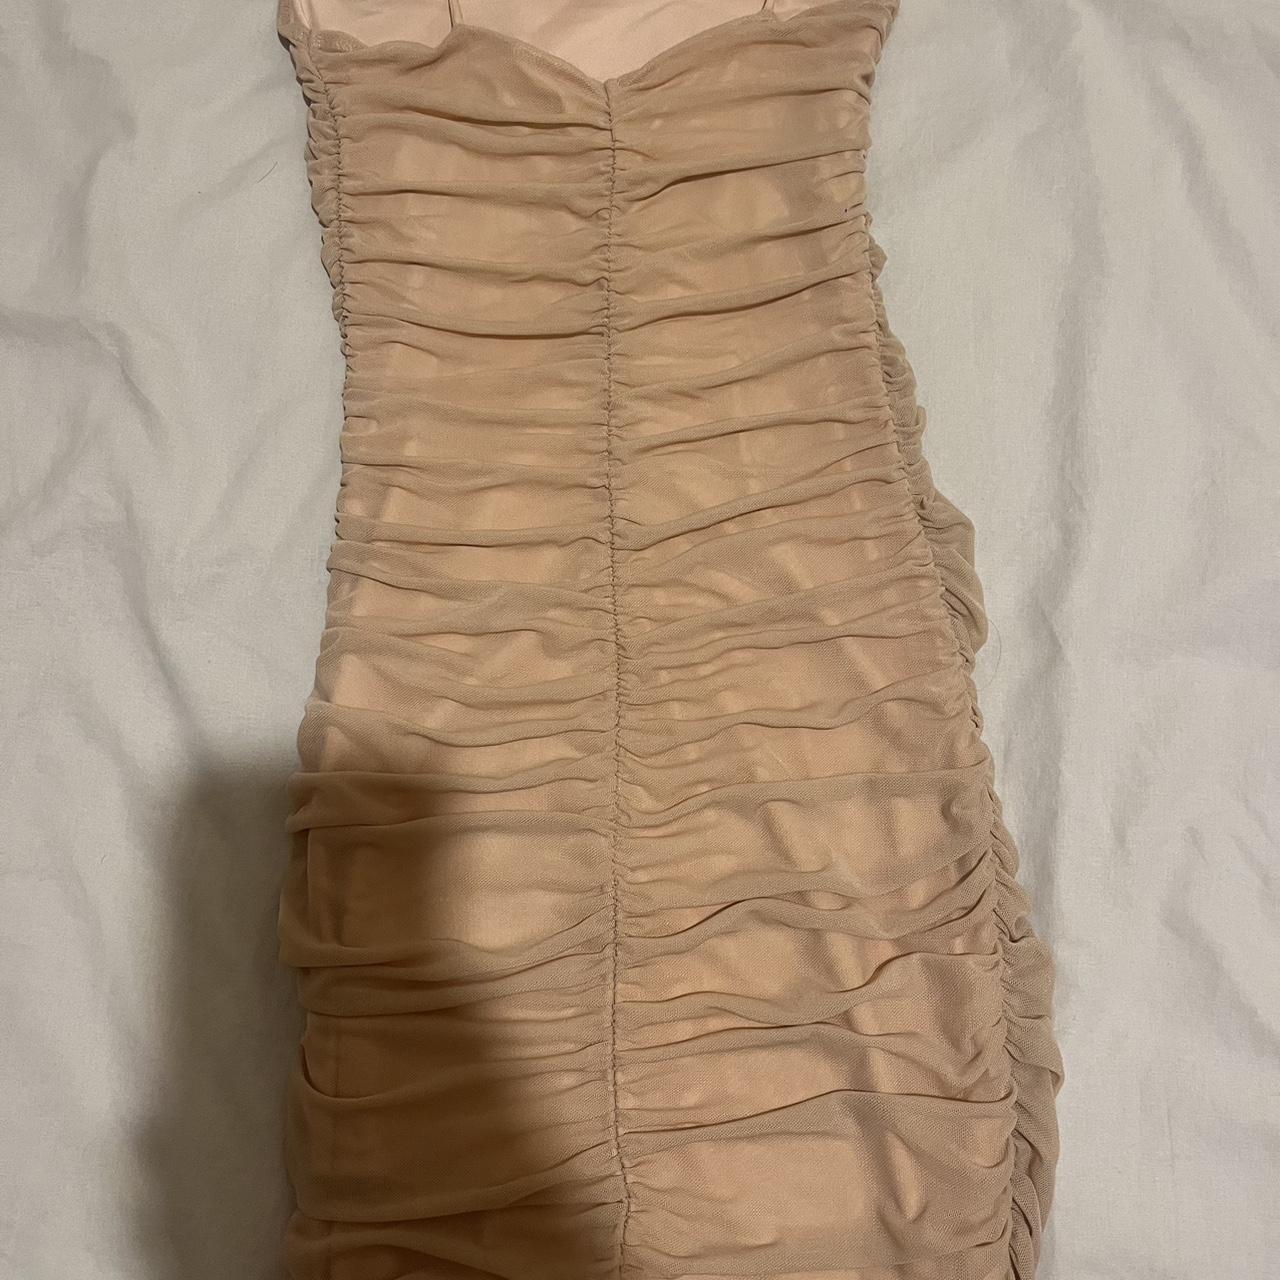 Oh Polly ruched back dress size 6 - Depop